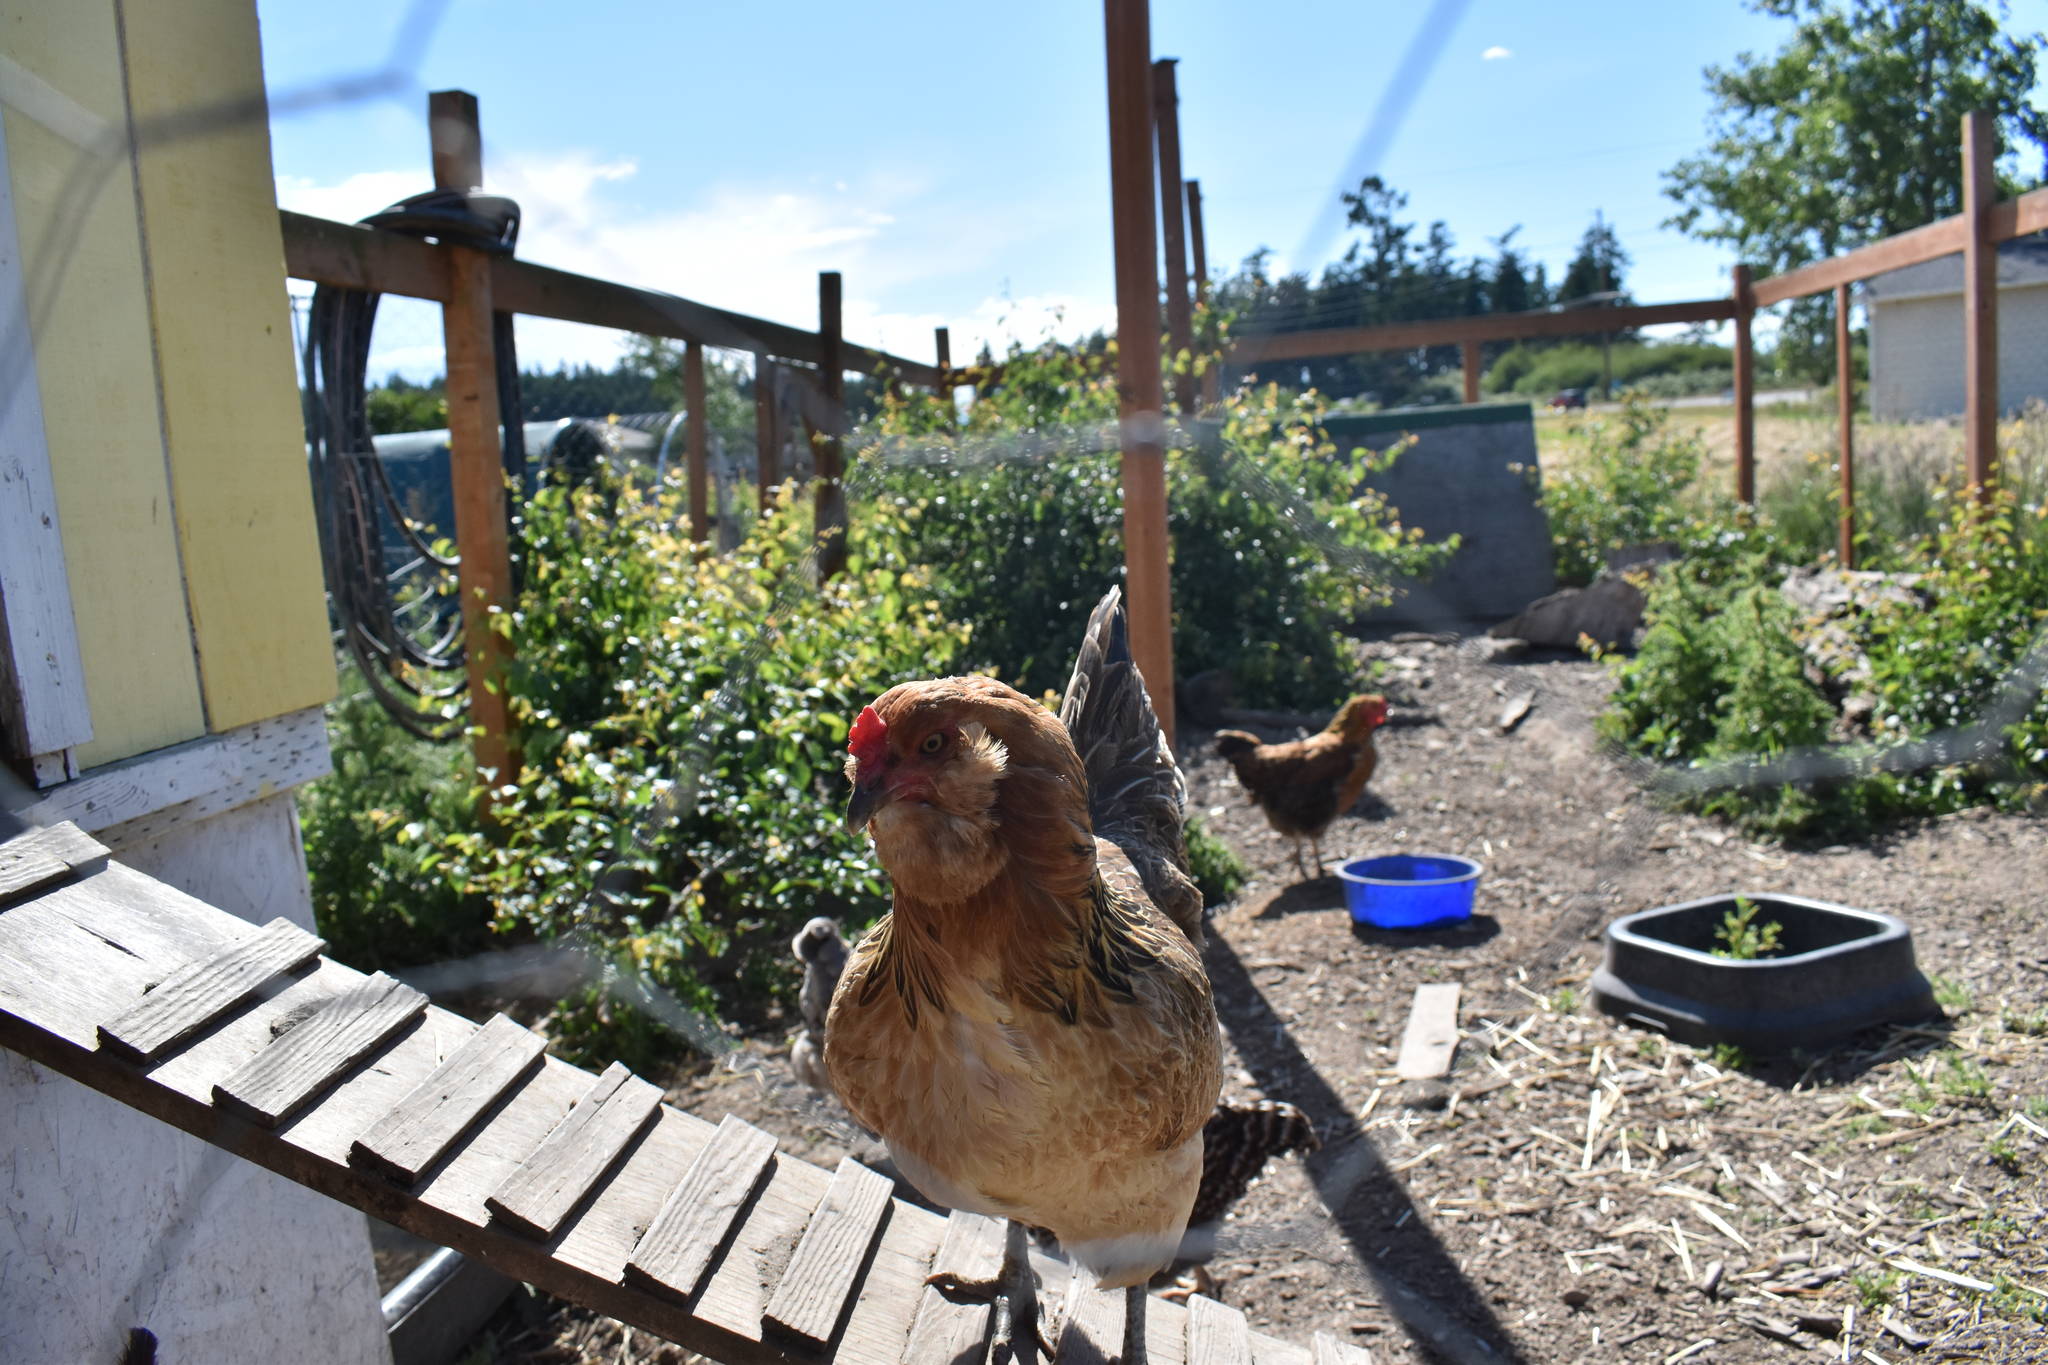 In addition to the egg-laying chickens and meat birds, Melissa Stewart also has a handful of chickens she keeps as pets. She grew up with a small flock on her family’s hobby horse farm in South Dakota. Photo by Emily Gilbert/Whidbey News-Times